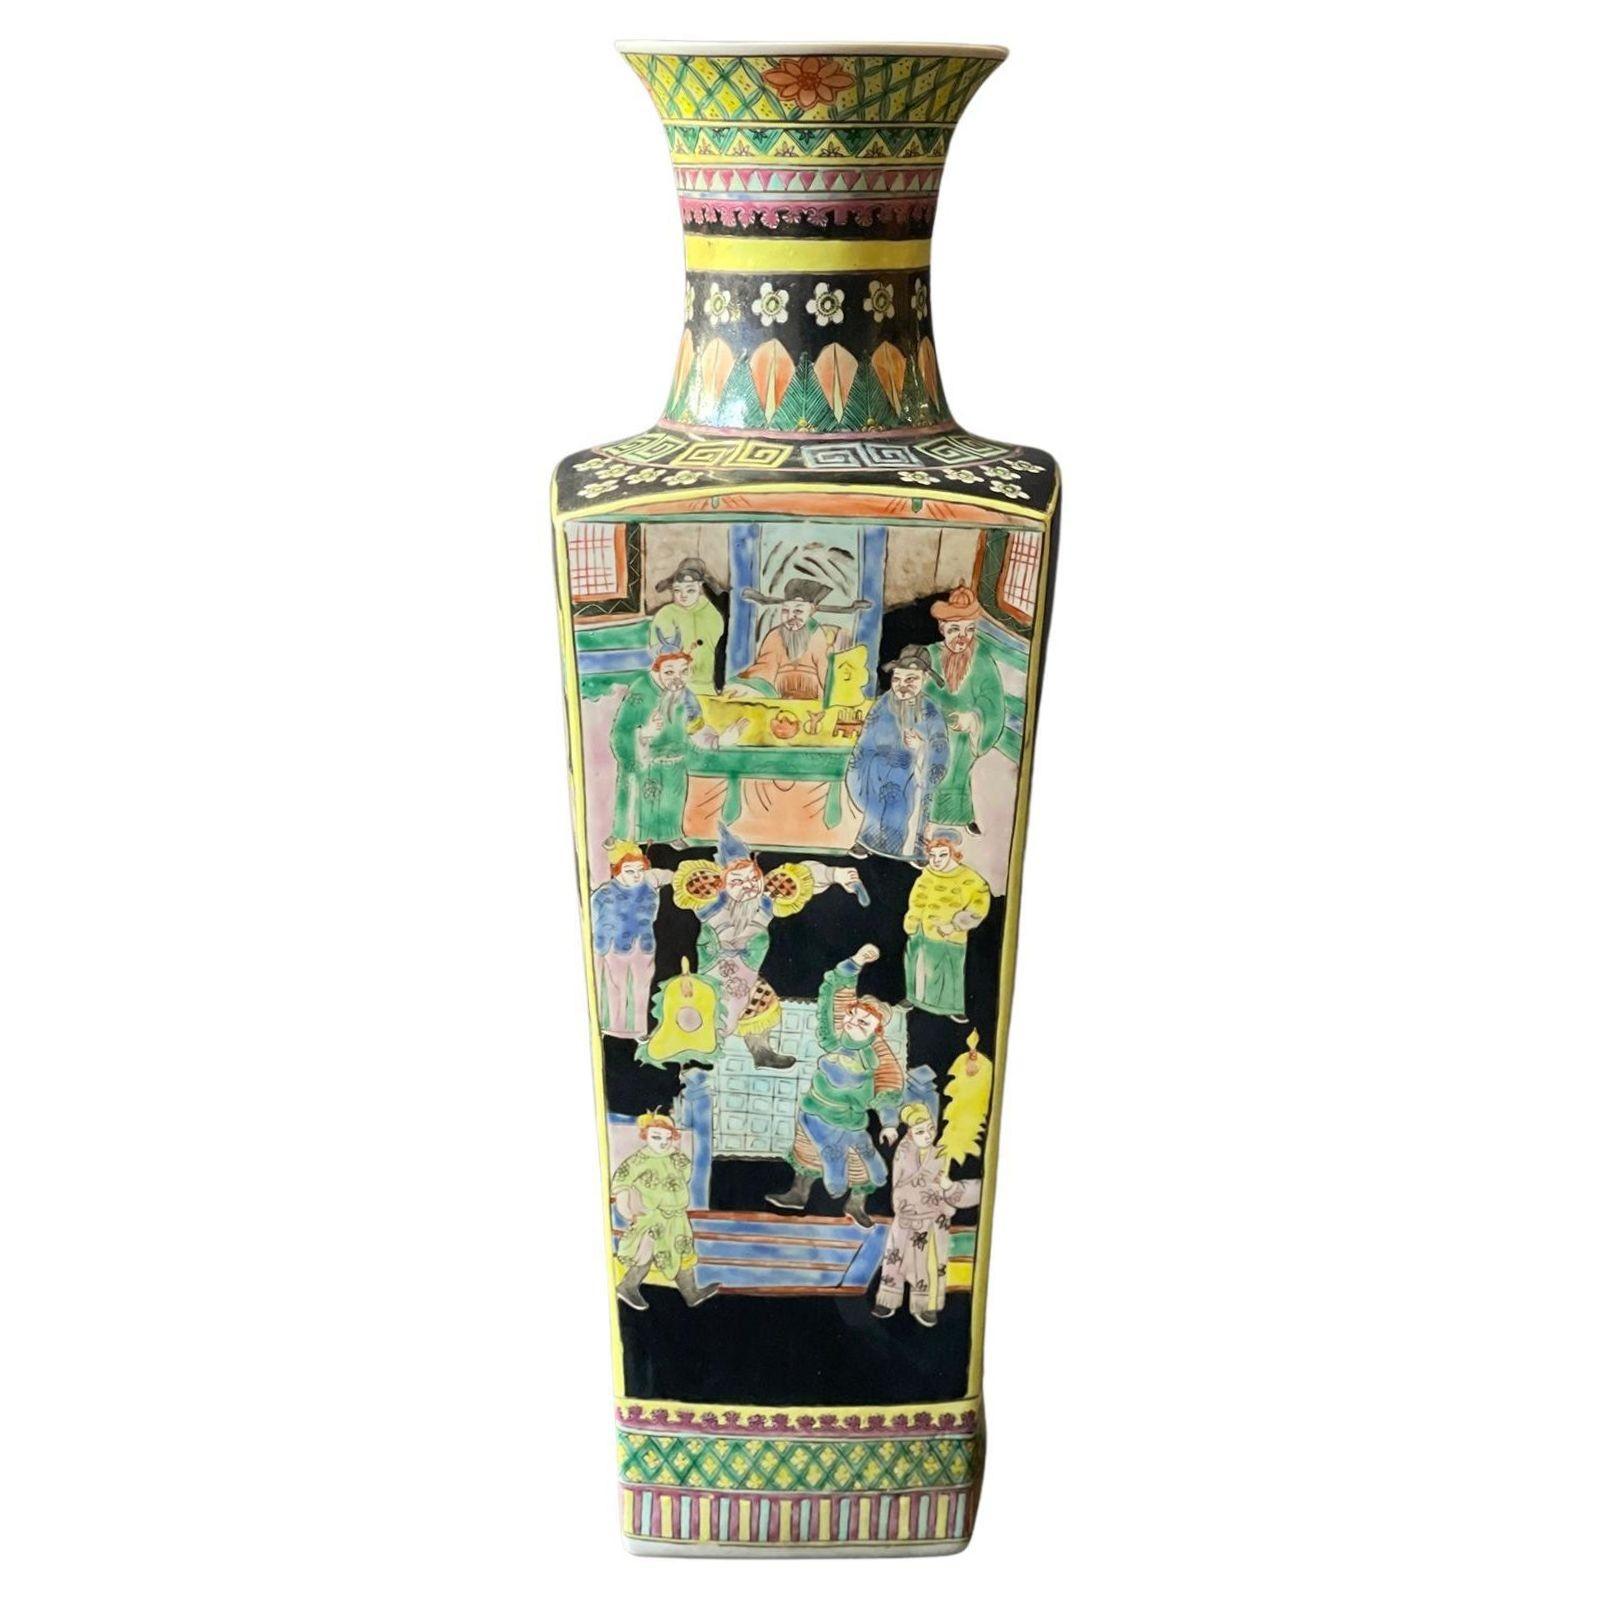 Pair of Chinese Famille Noire porcelain vases with square baluster form with battle scenes and flower patterns around. Made in the 20th Century. 
Dimensions:
23